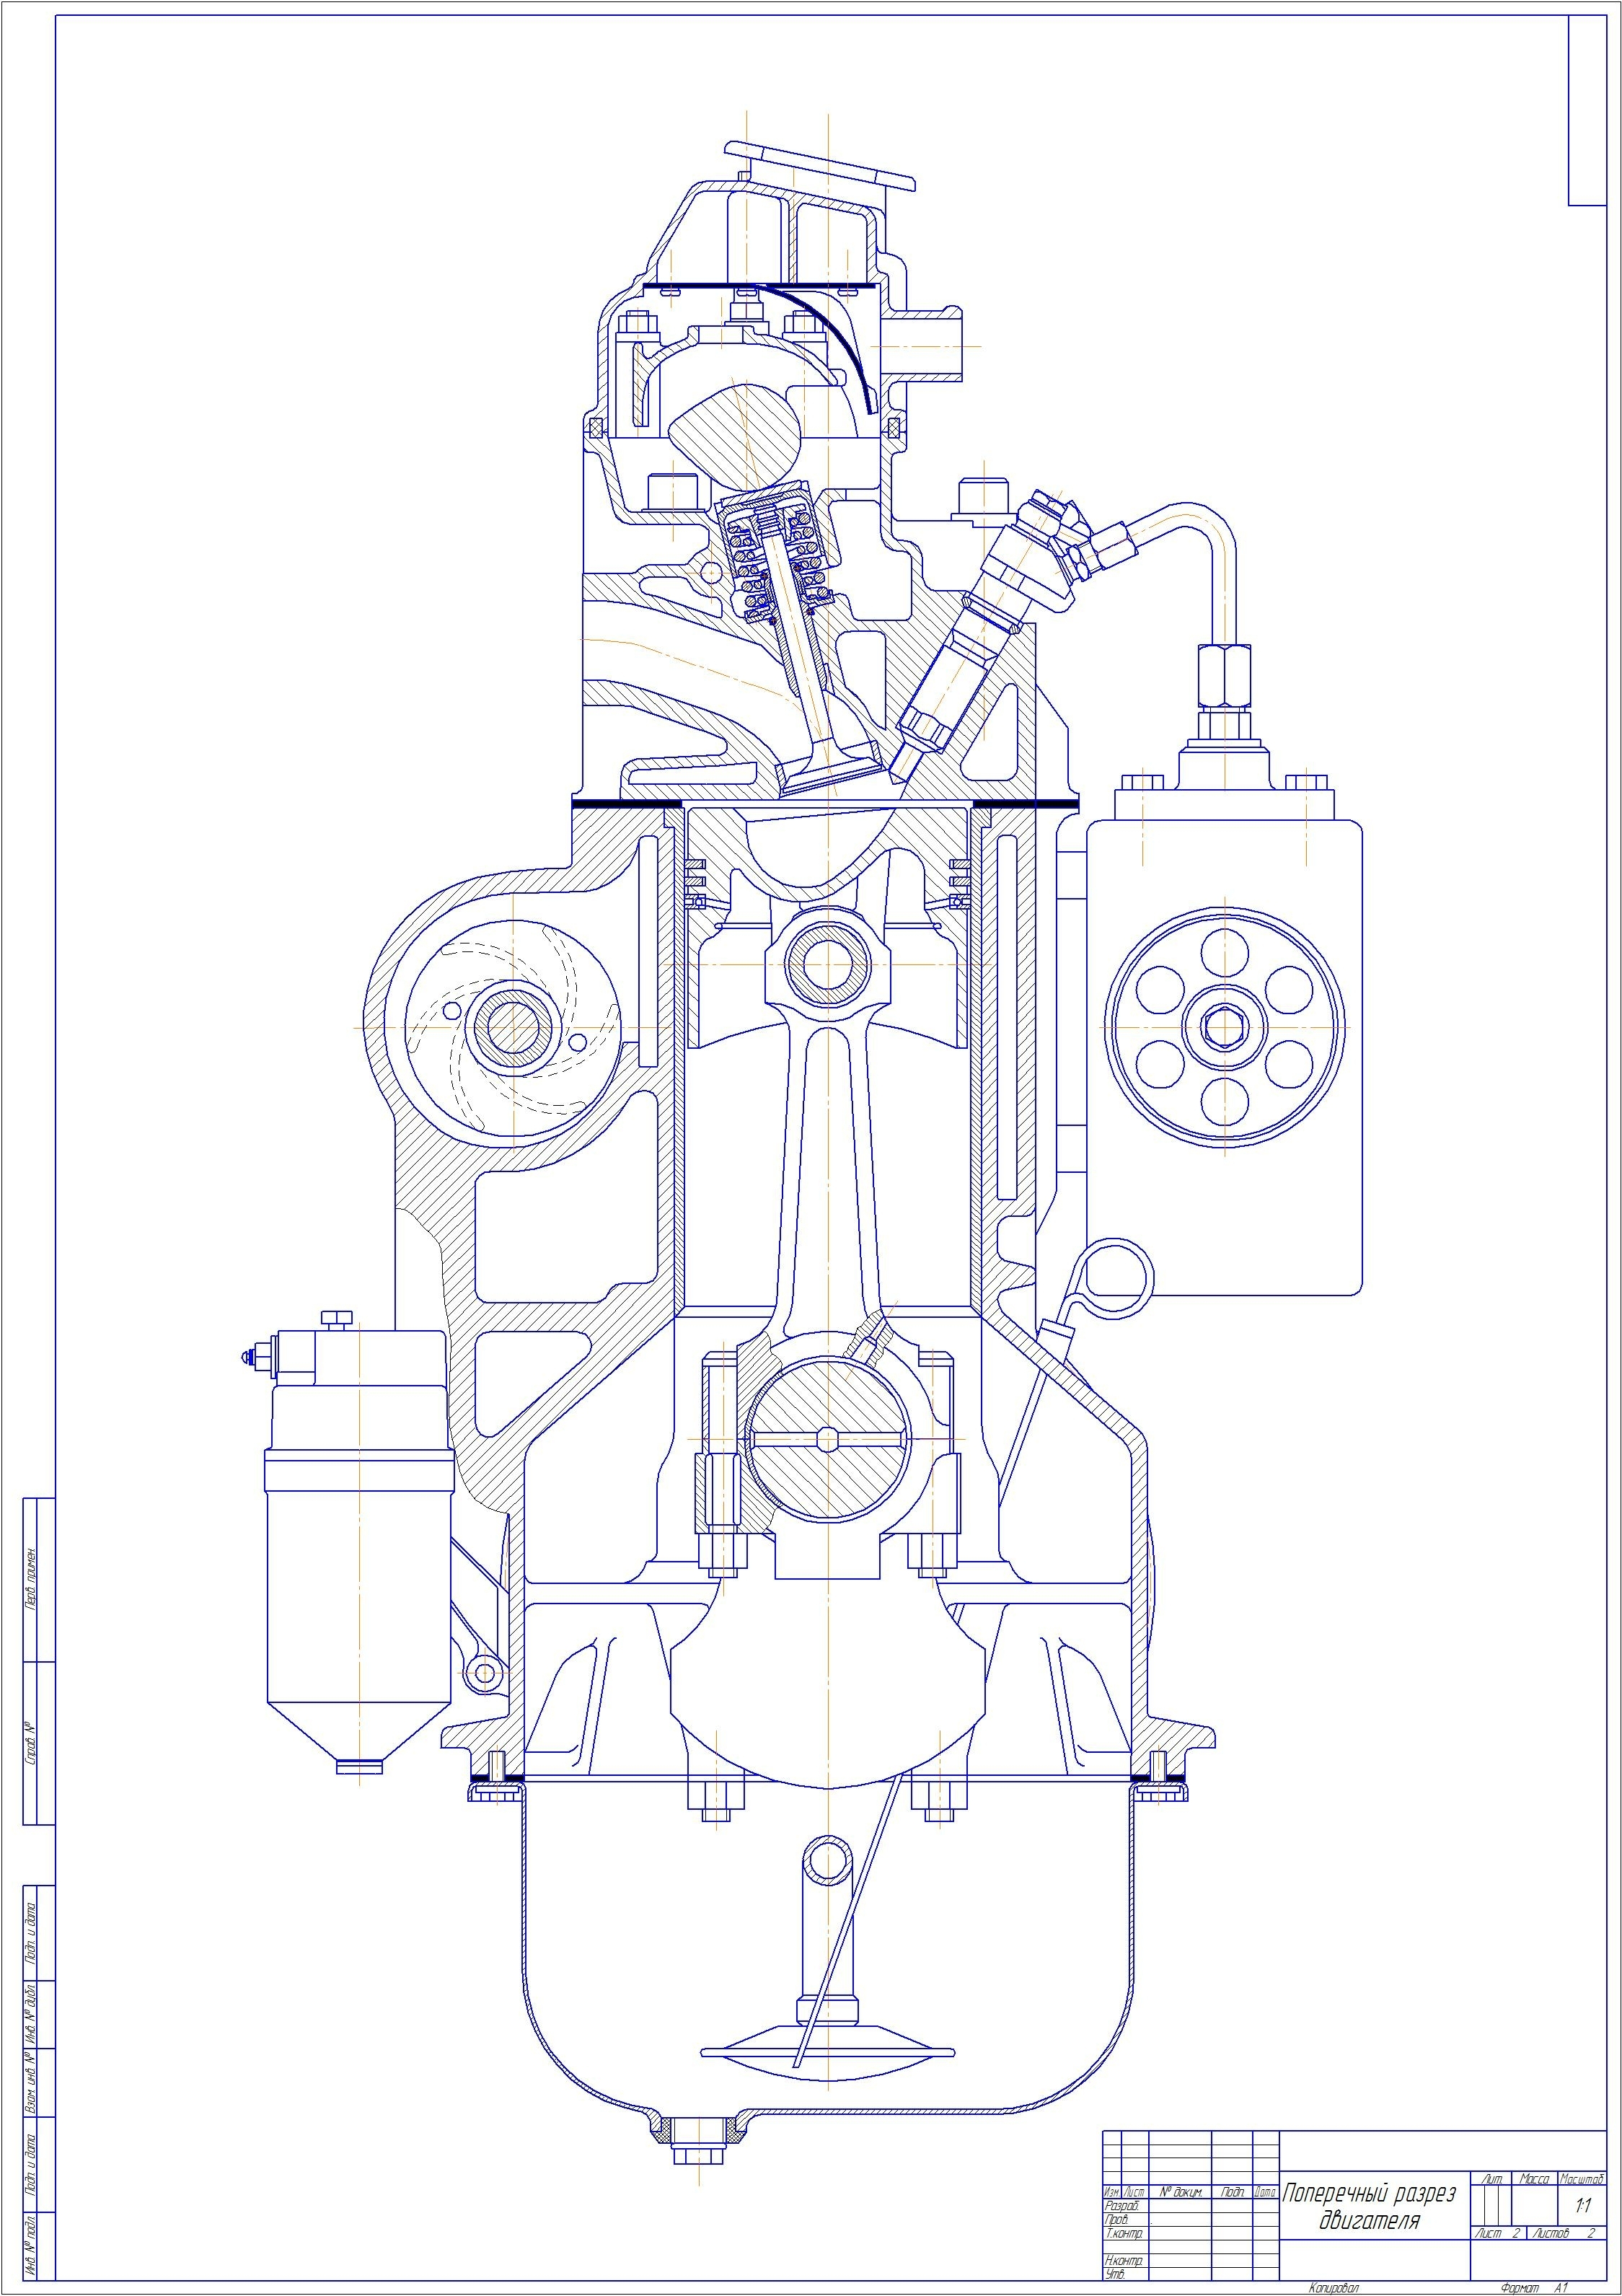 Cross section of internal combustion engine | Download drawings ...